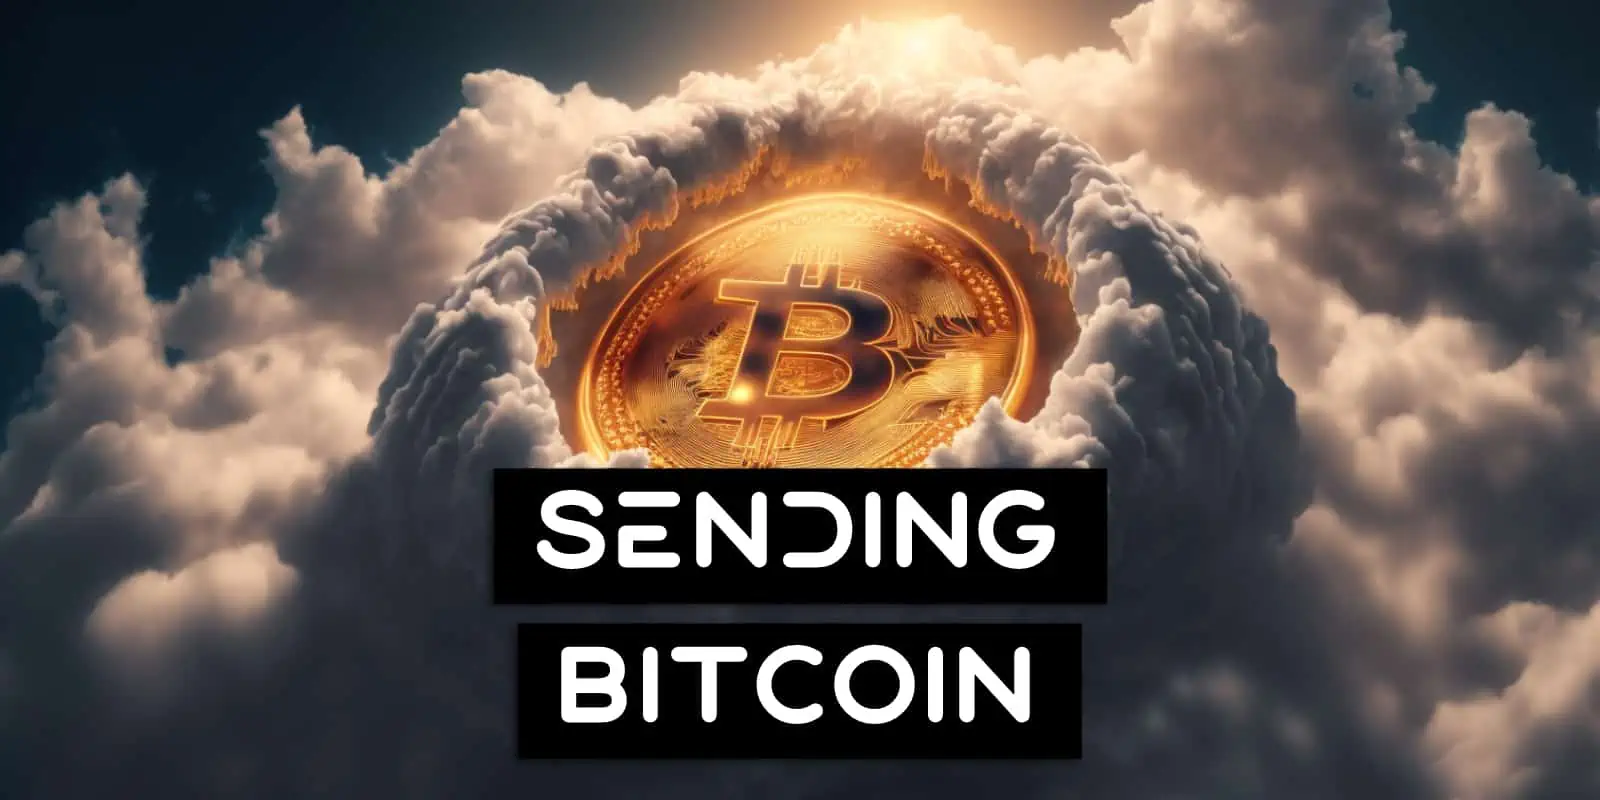 How To Send Bitcoin